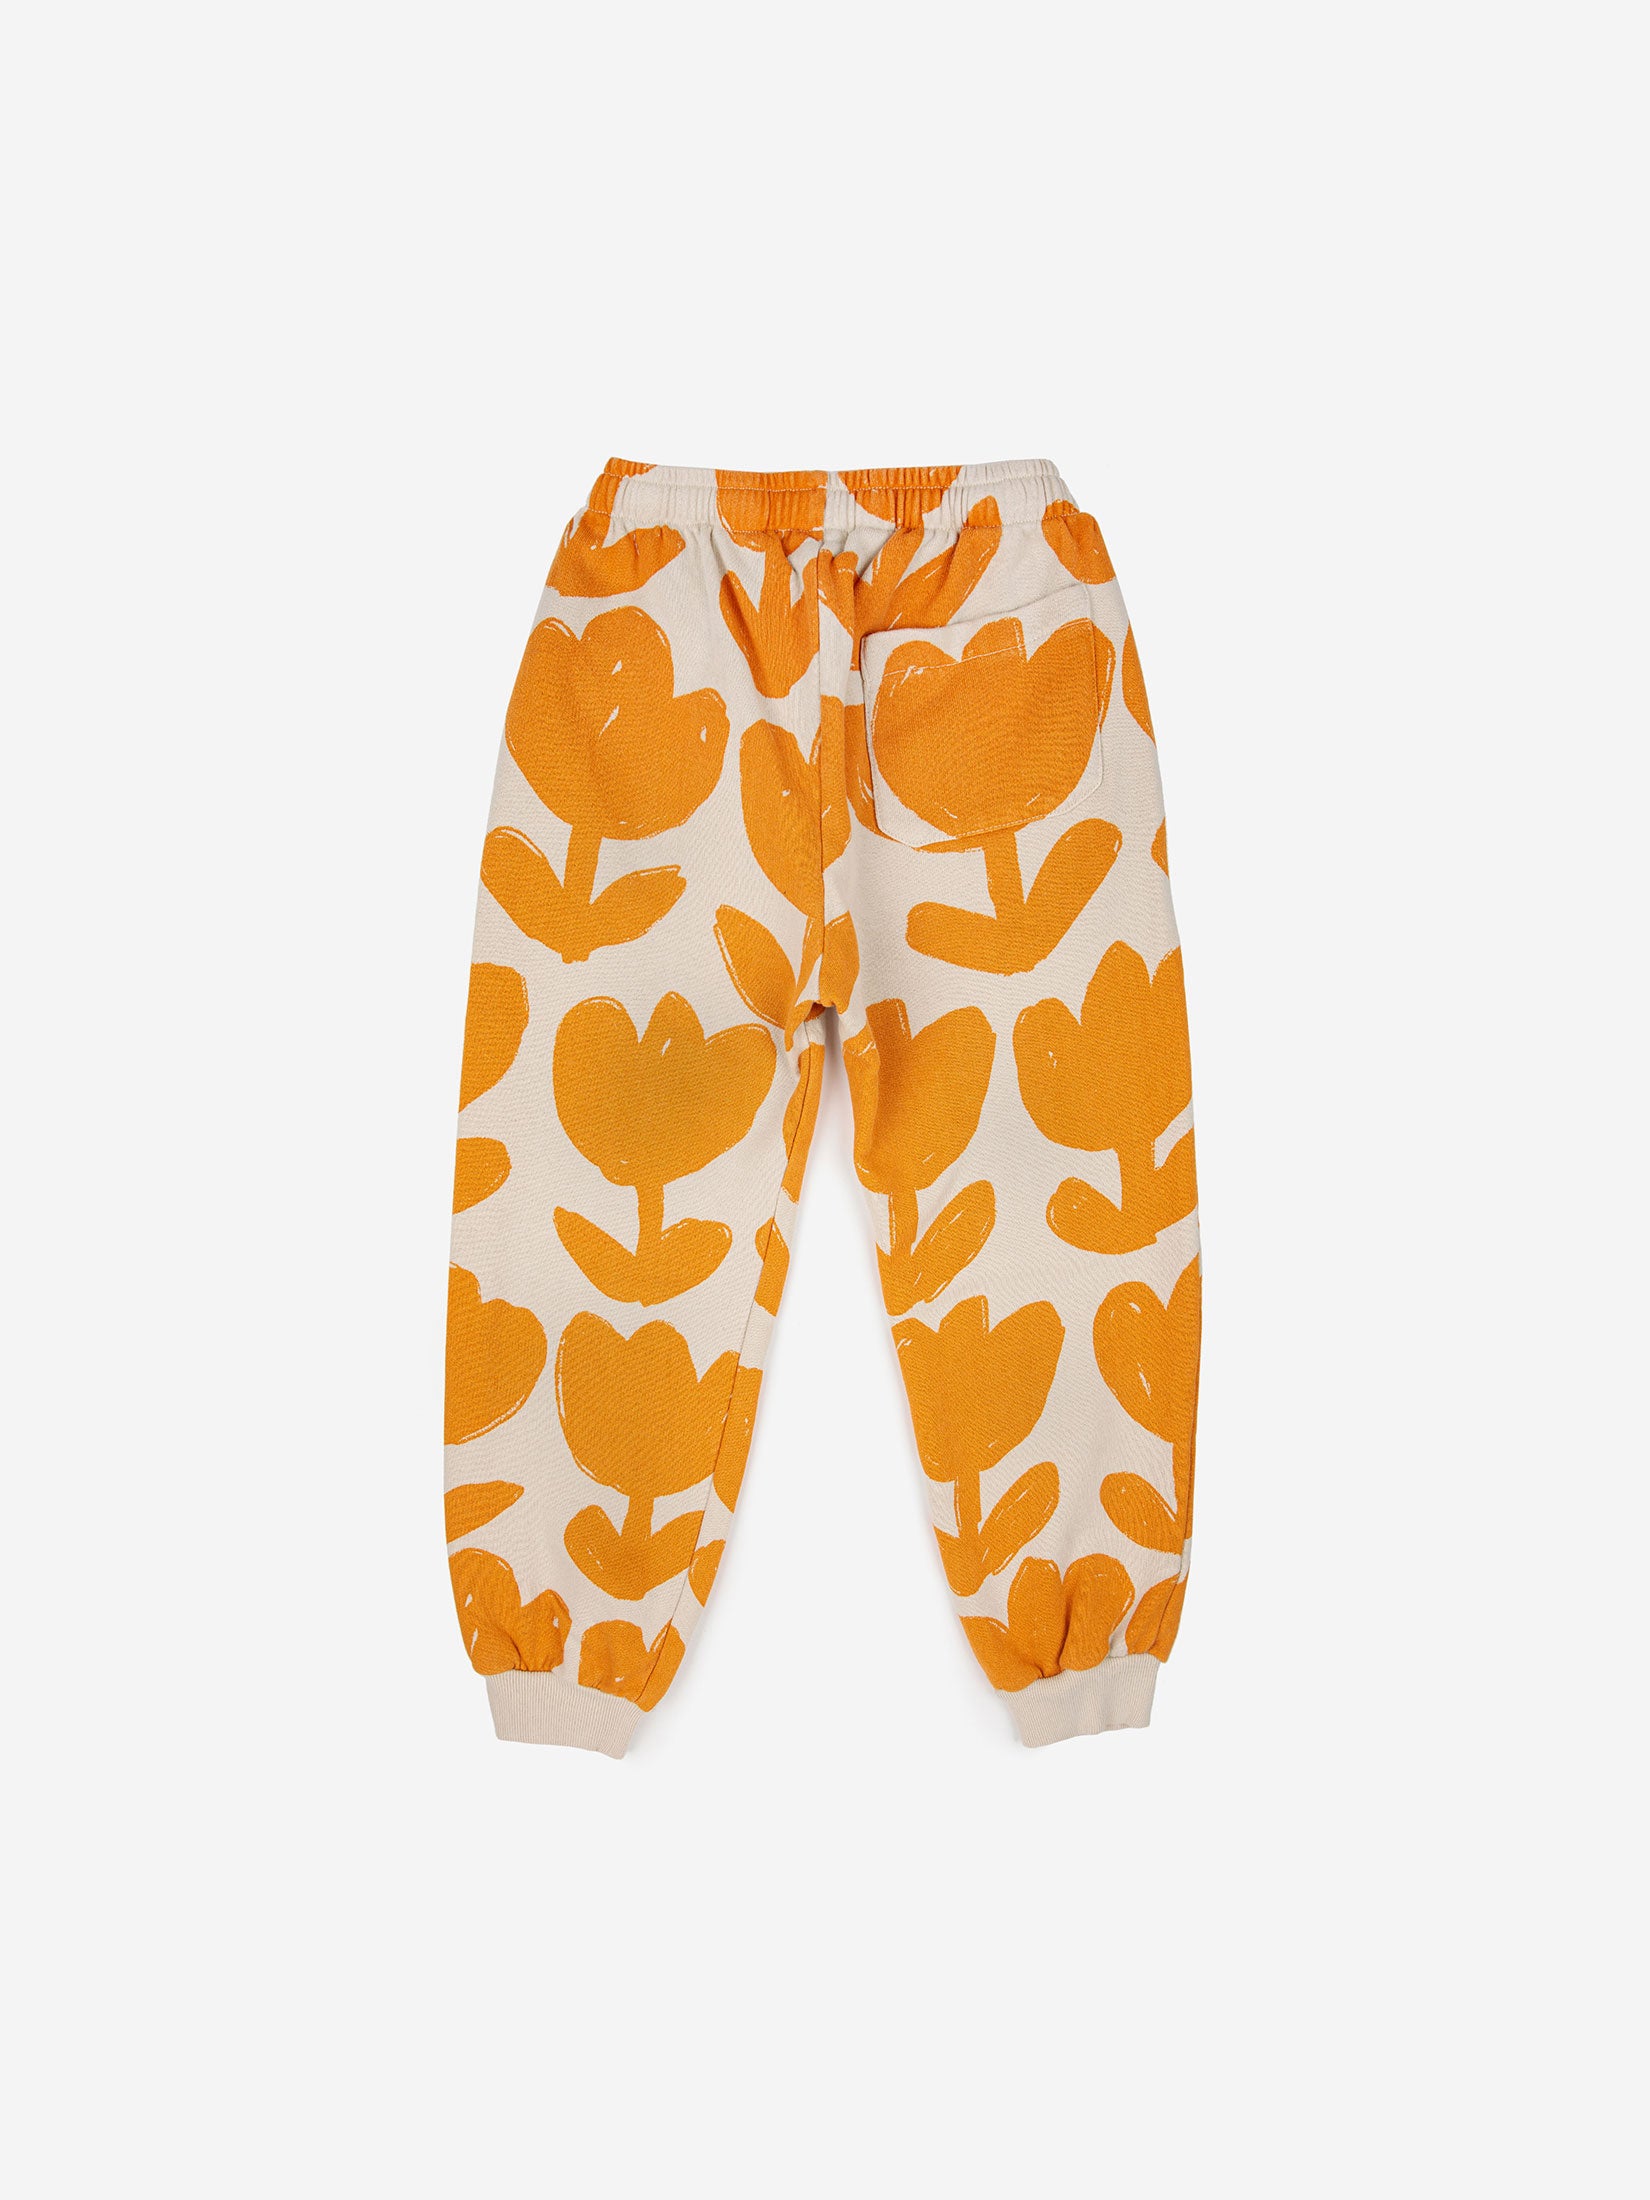 Retro Flowers all over jogging pants - 2-3Y